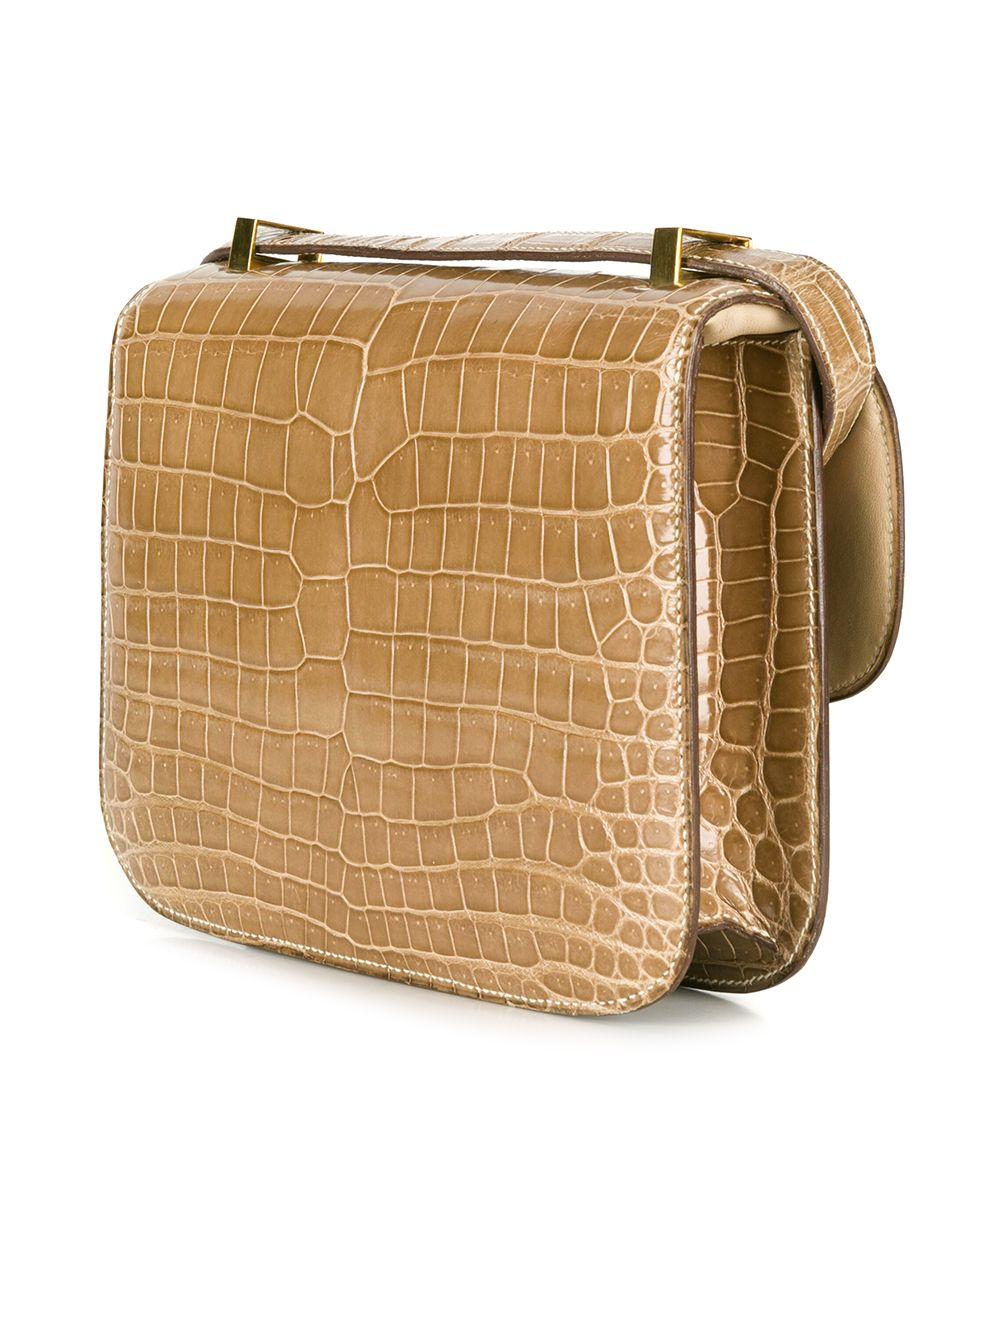 This extremely rare, vintage crocodile Hermès Constance bag comes in a unique and extremely sought after Pousierre Beige colour. The interior features one spacious interior compartment, containing one wide open slip pocket and one wide pocket with a